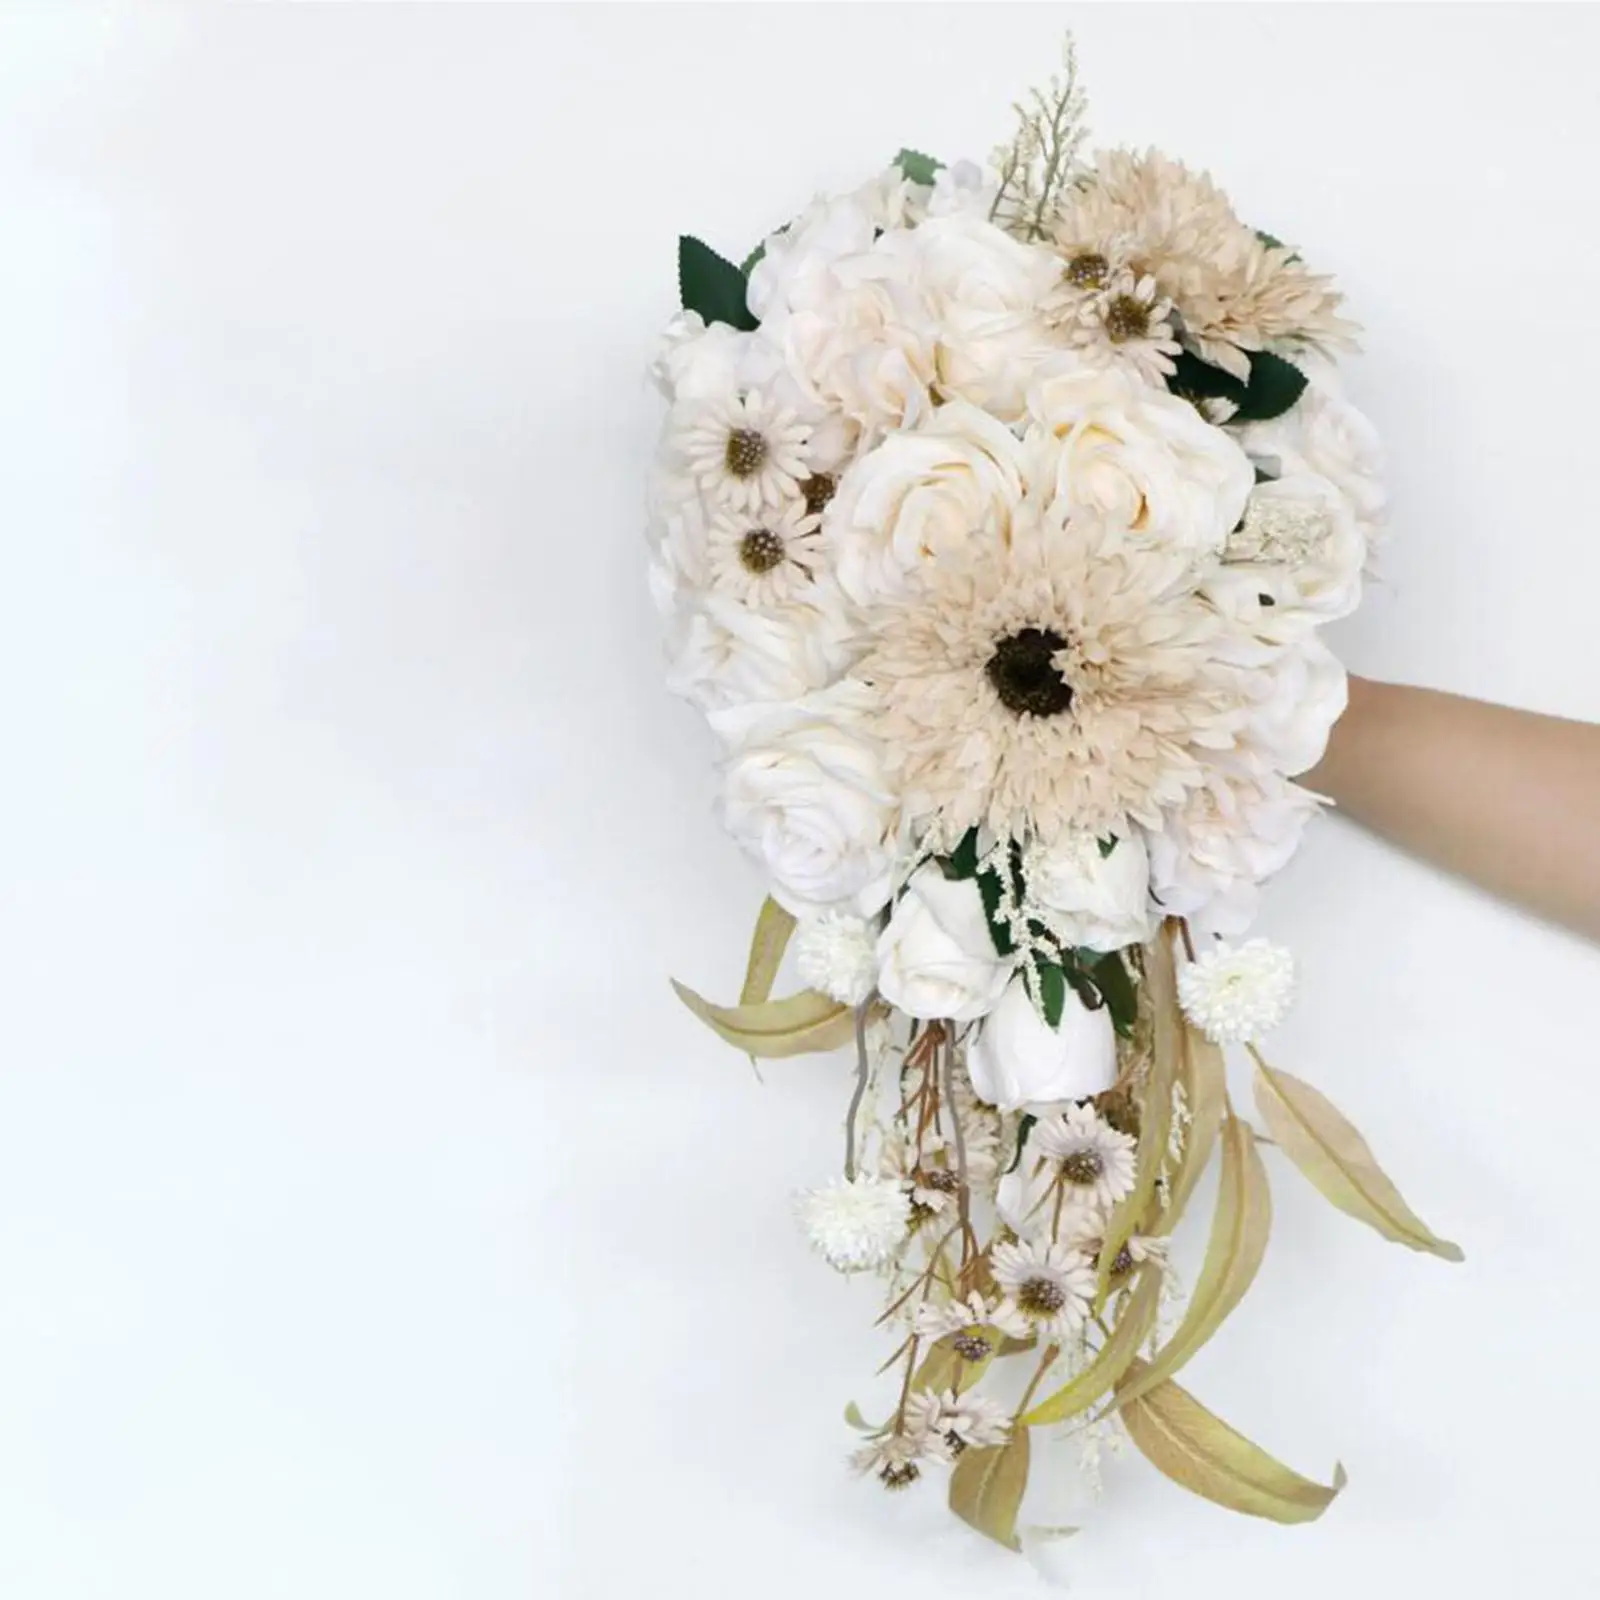 Romantic Bridal Bouquets Cream Color Rose, Sunflowers, Daisy and Leaves Artificial Flowers for Wedding Church Bridal Shower